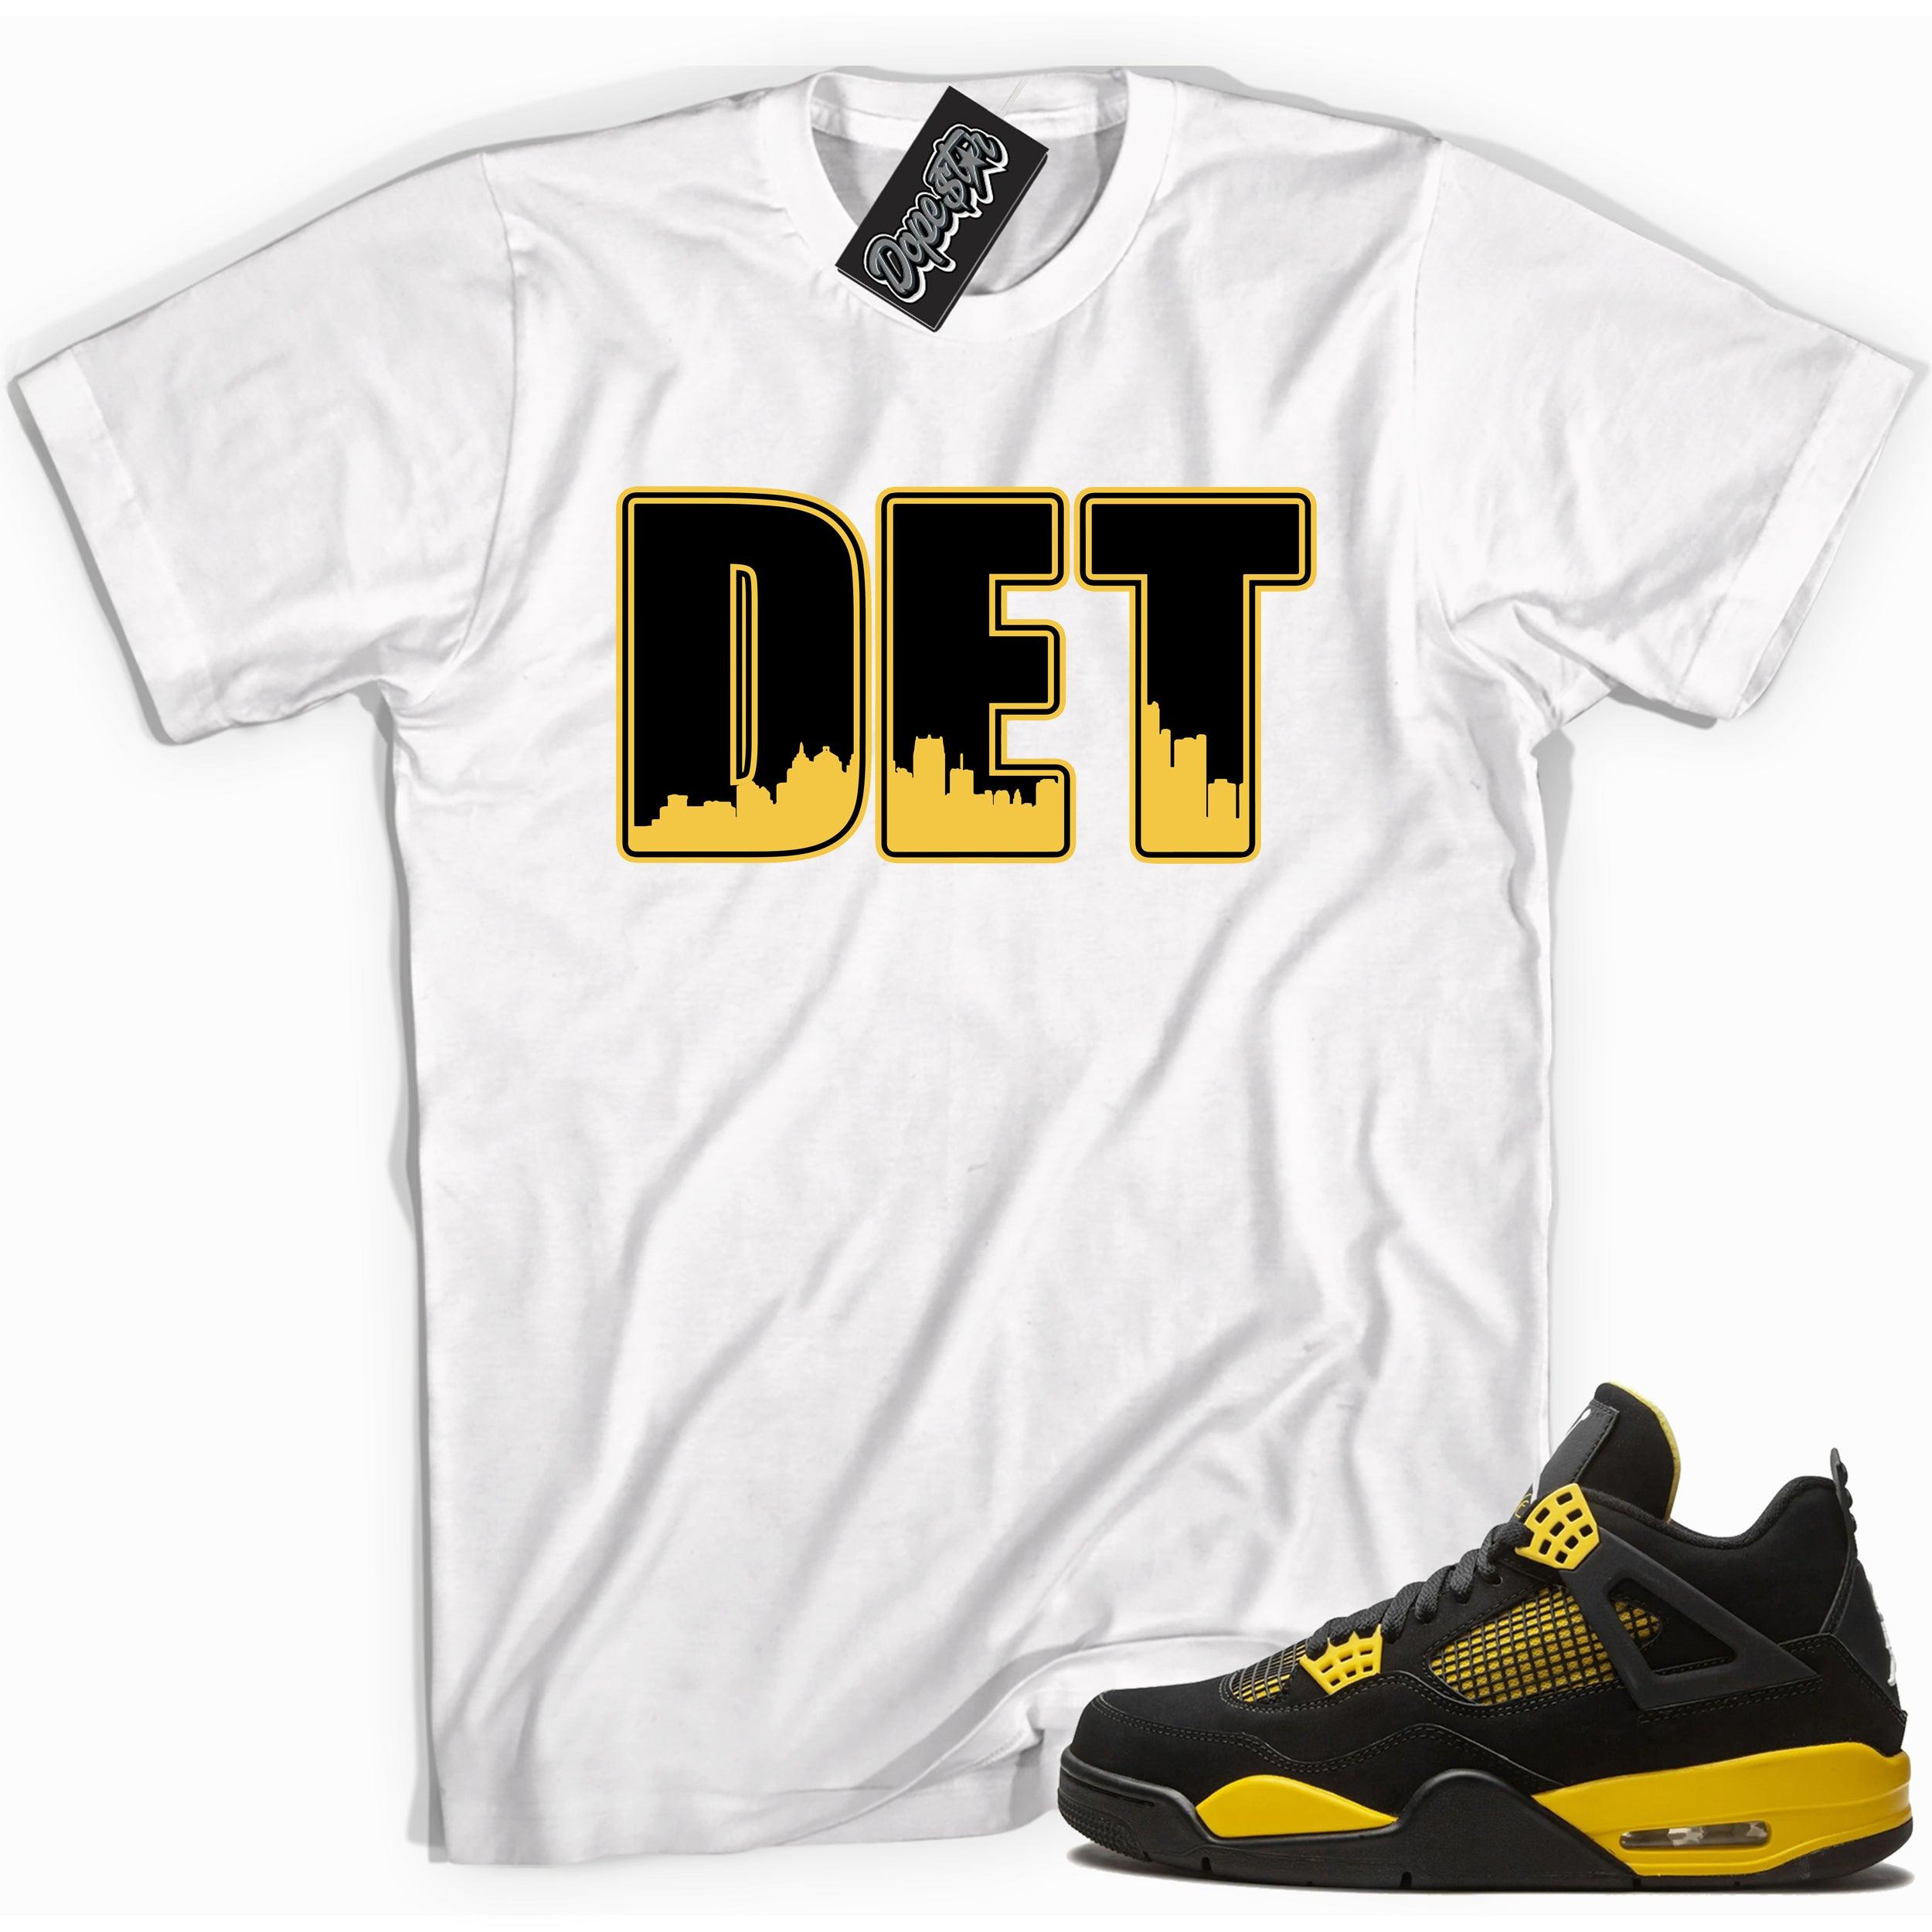 Cool white graphic tee with 'DETROIT' print, that perfectly matches Air Jordan 4 Thunder sneakers